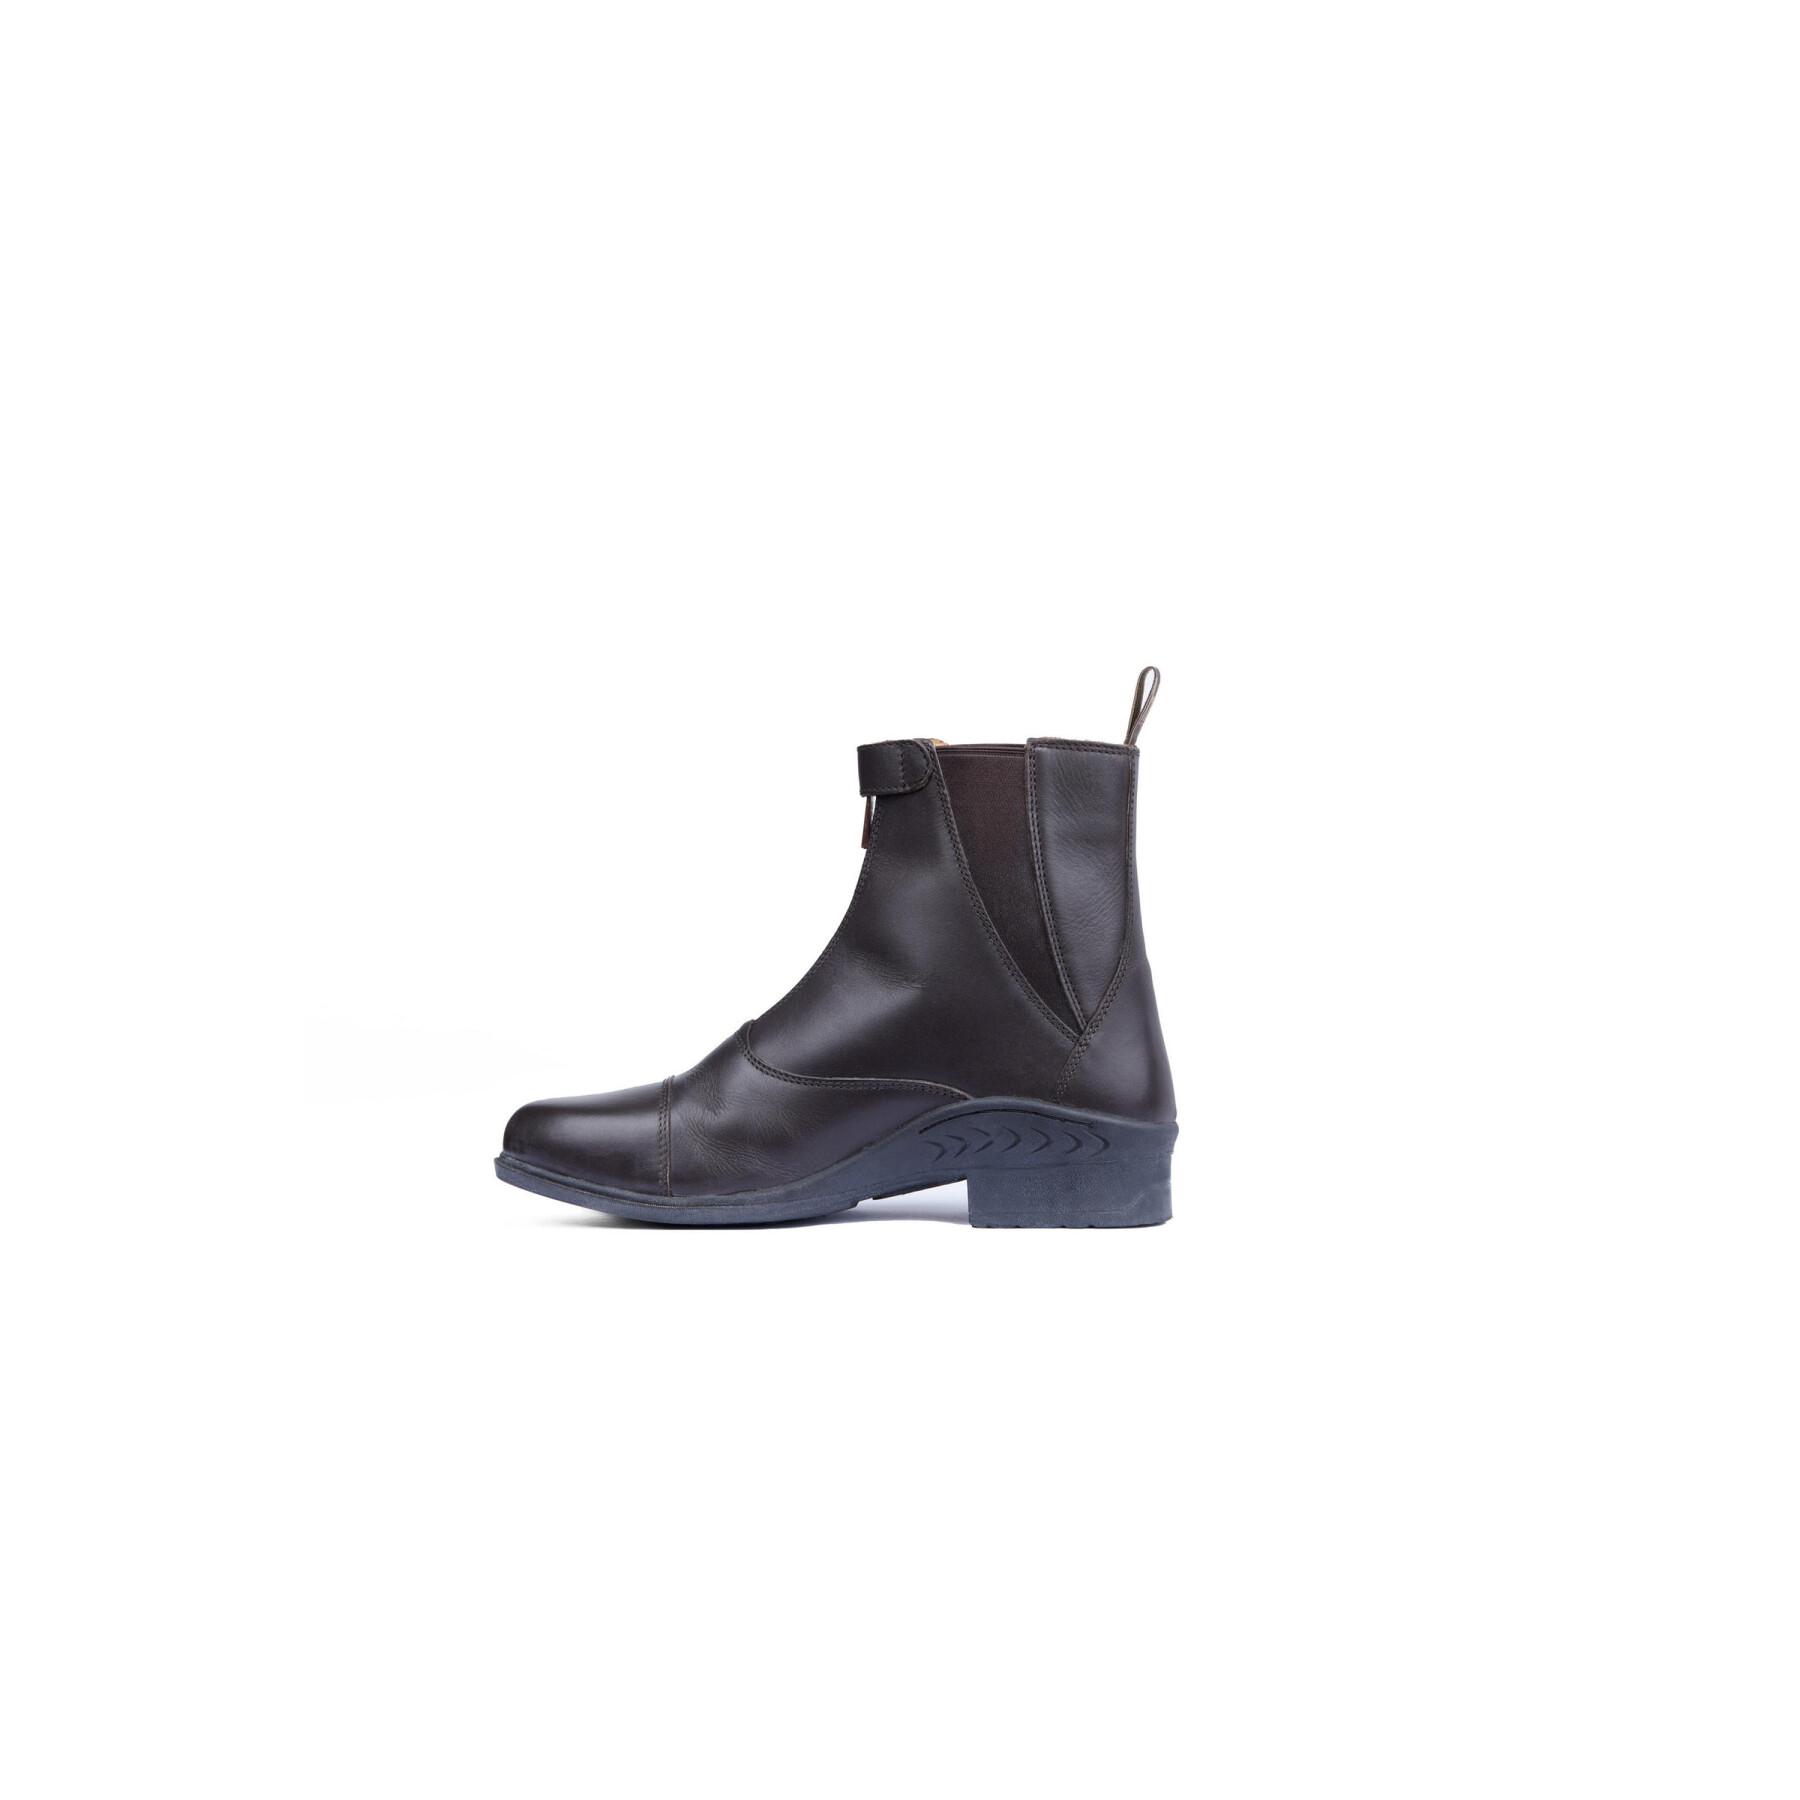 Riding boots with front zip Horze Rose Jodphur